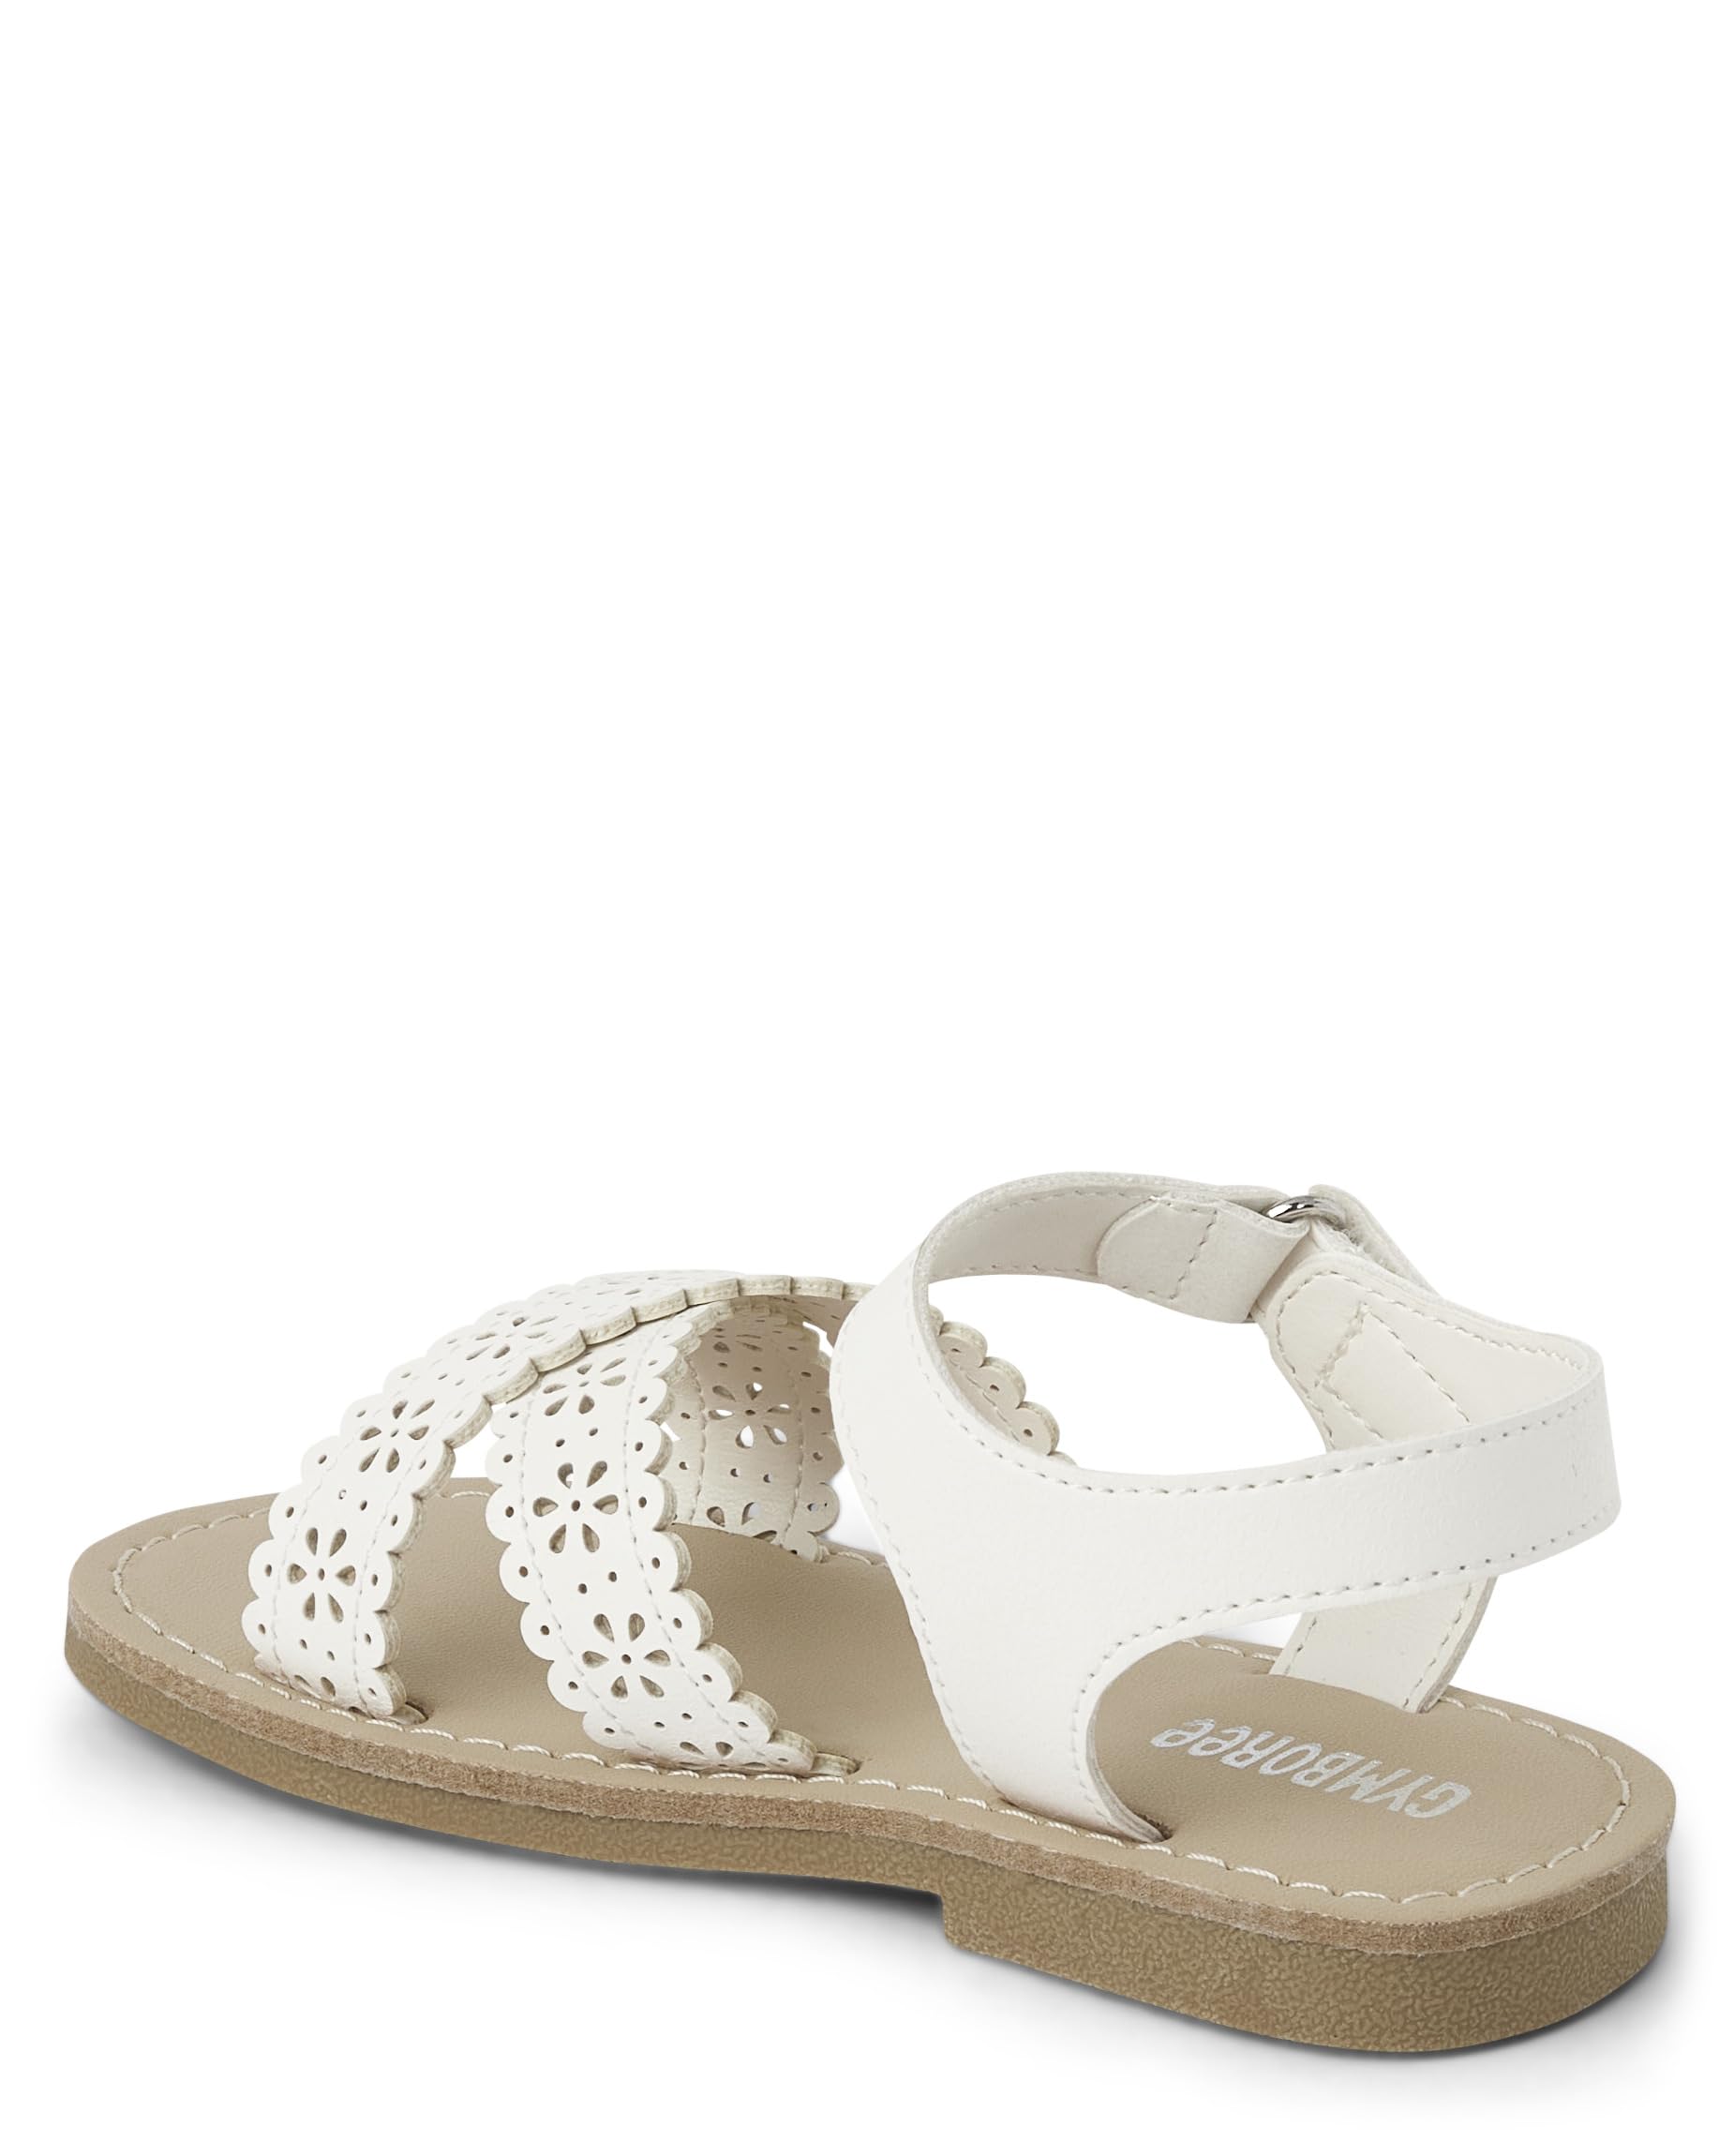 Gymboree Girl's and Toddler Flat Sandals Slipper